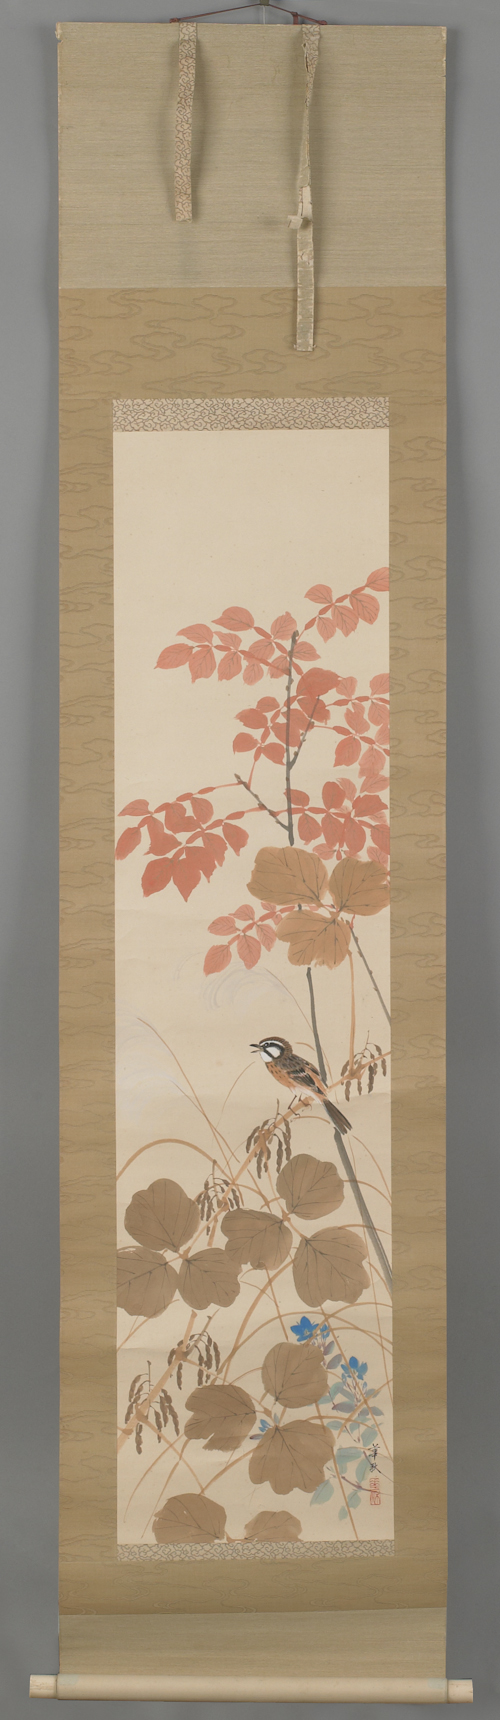 Japanese watercolor on silk scroll early